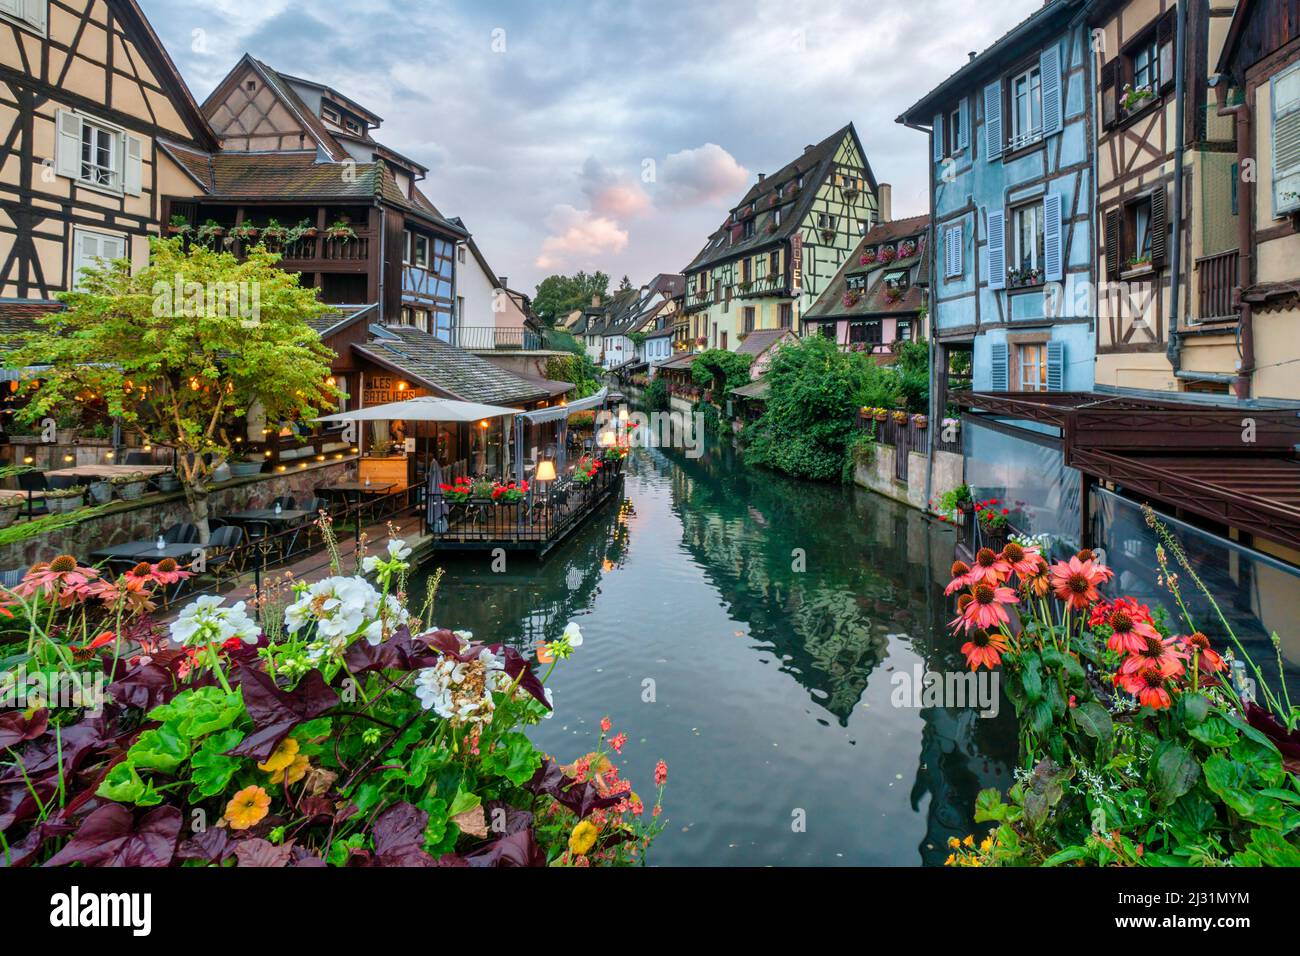 Half-timbered houses in Little Venice, Colmar, Alsace, France, Europe Stock Photo